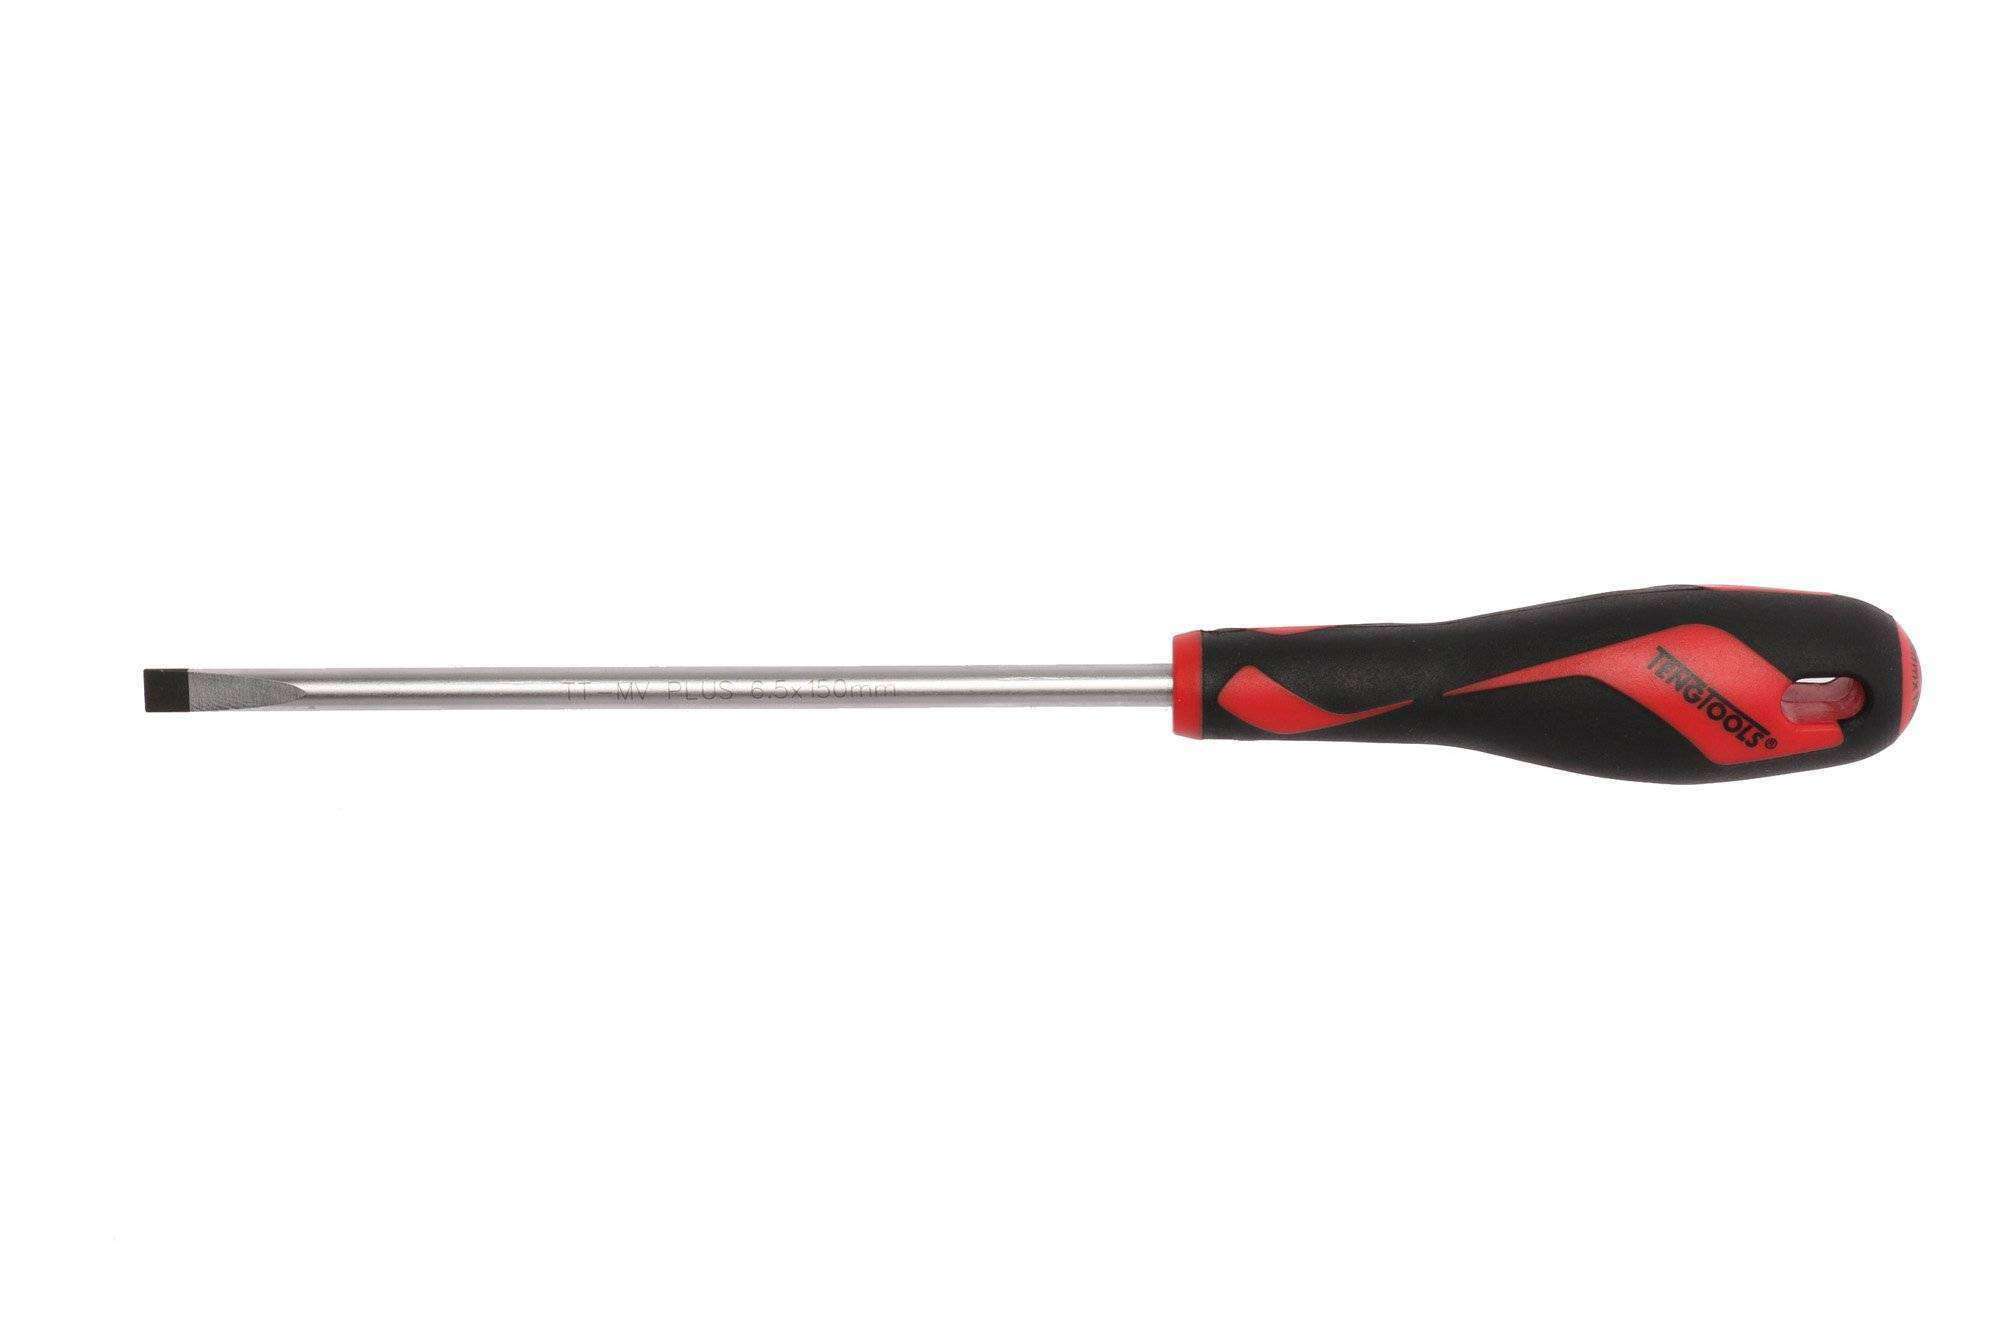 Teng Tools 6.5mm / 1/4 Inch x 150mm / 5.9 Inch Long Flat Type Slotted Head Screwdriver - MD928N5